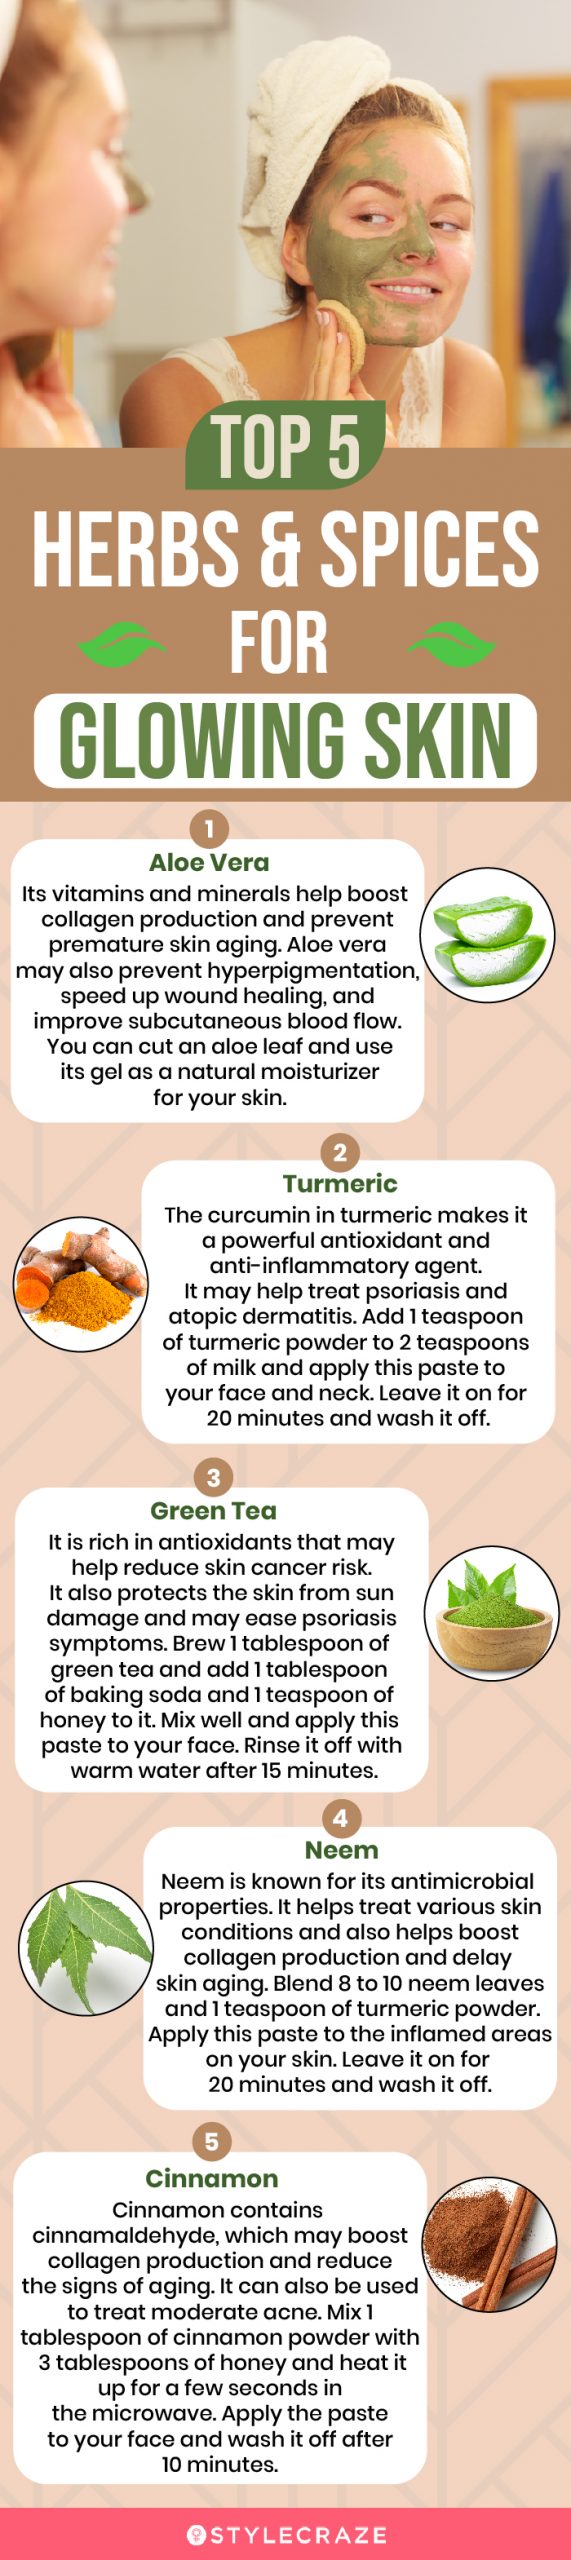 top 5 herbs & spices for glowing (infographic)